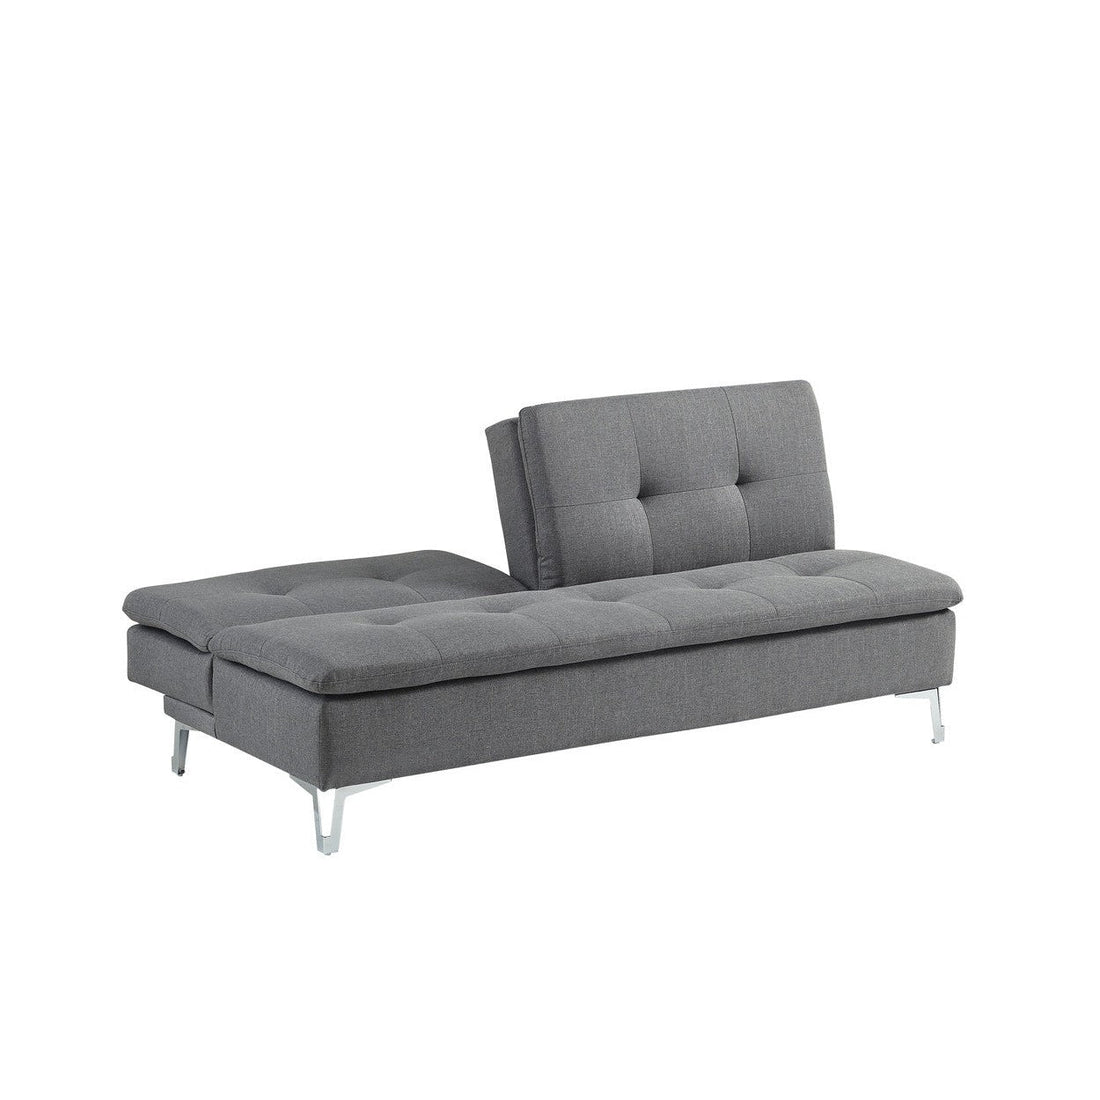 SOFA BED, GRAY 4WC-8764GY-3CL